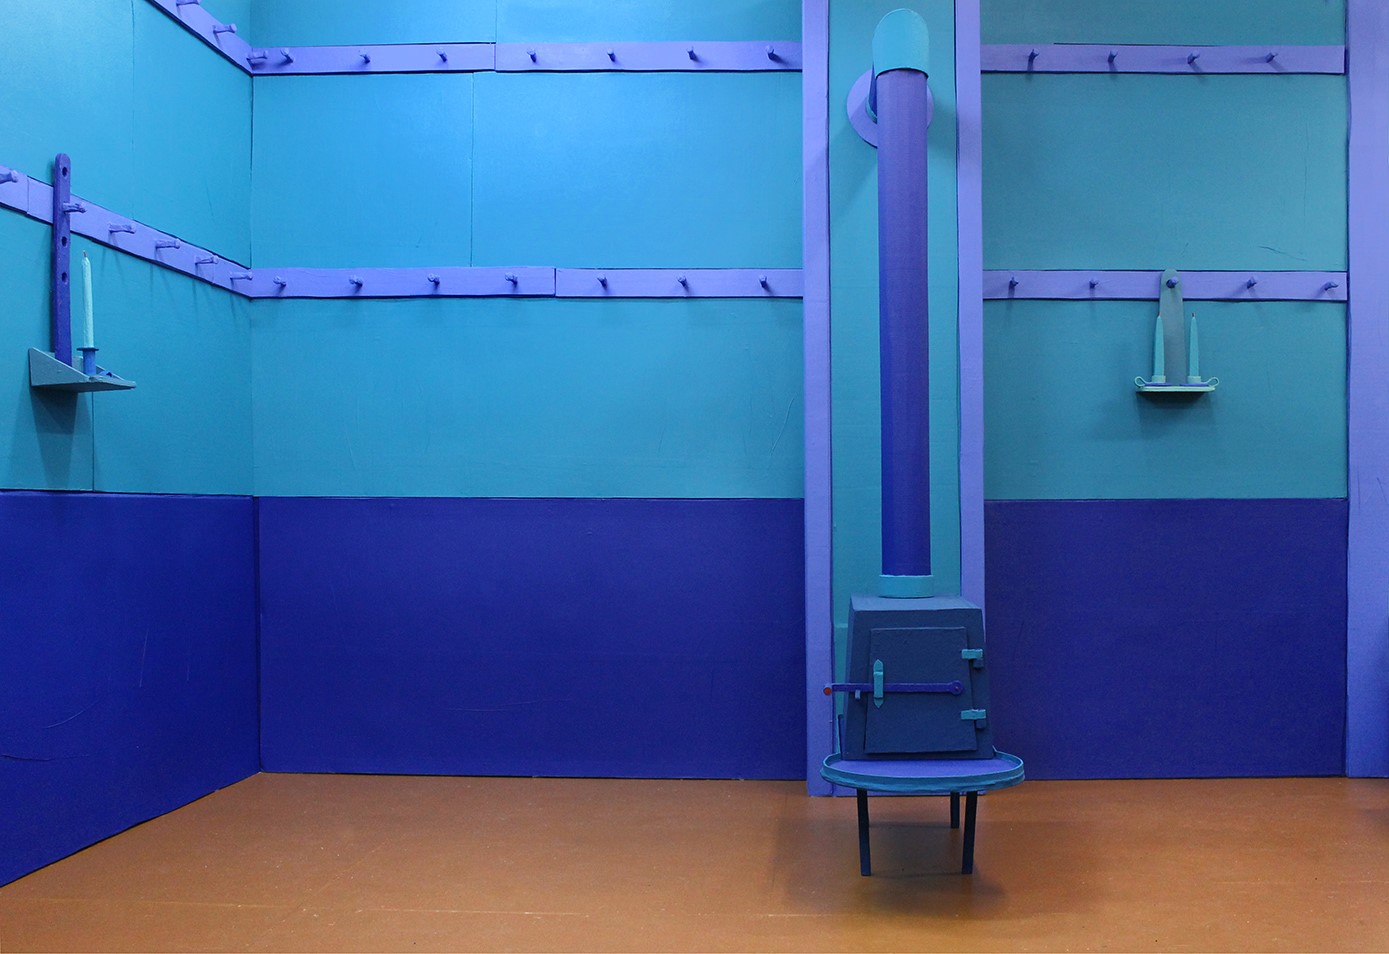 A room with blue walls and a bench.